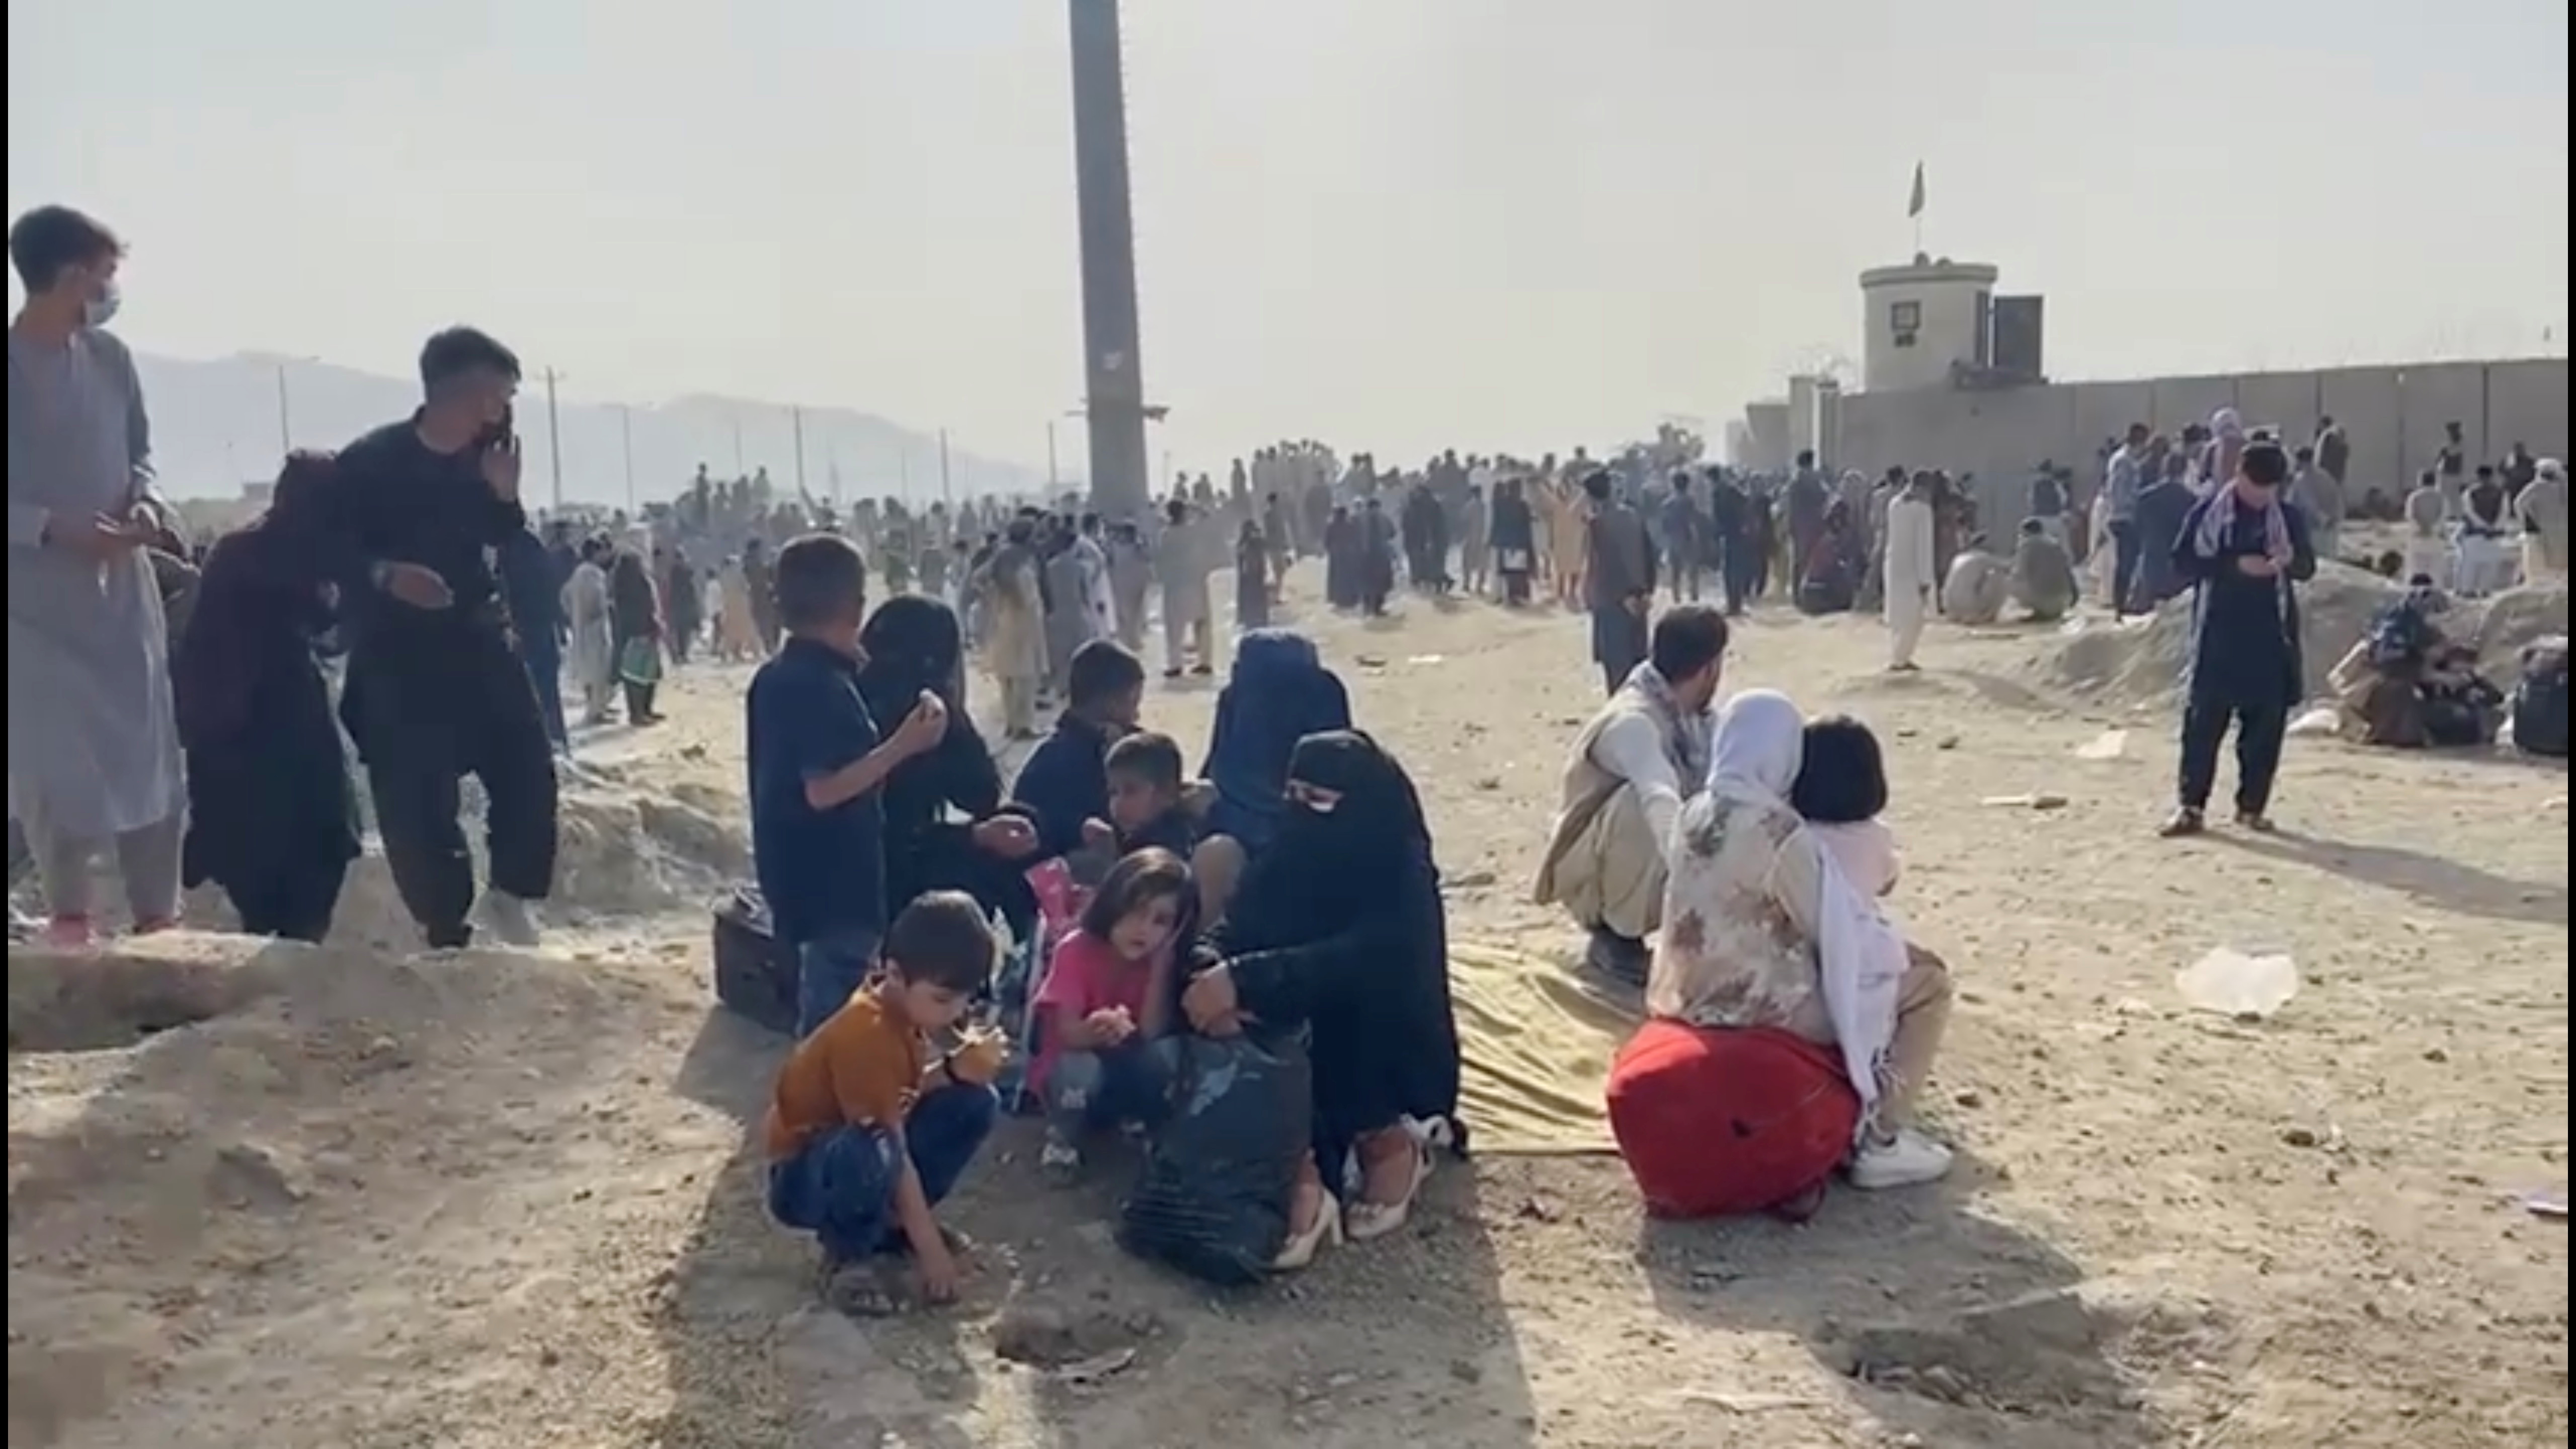 People gathered outside the airport react to gunfire, in Kabul, Afghanistan August 18, 2021 in this still image taken from video. ASVAKA NEWS via REUTERS   